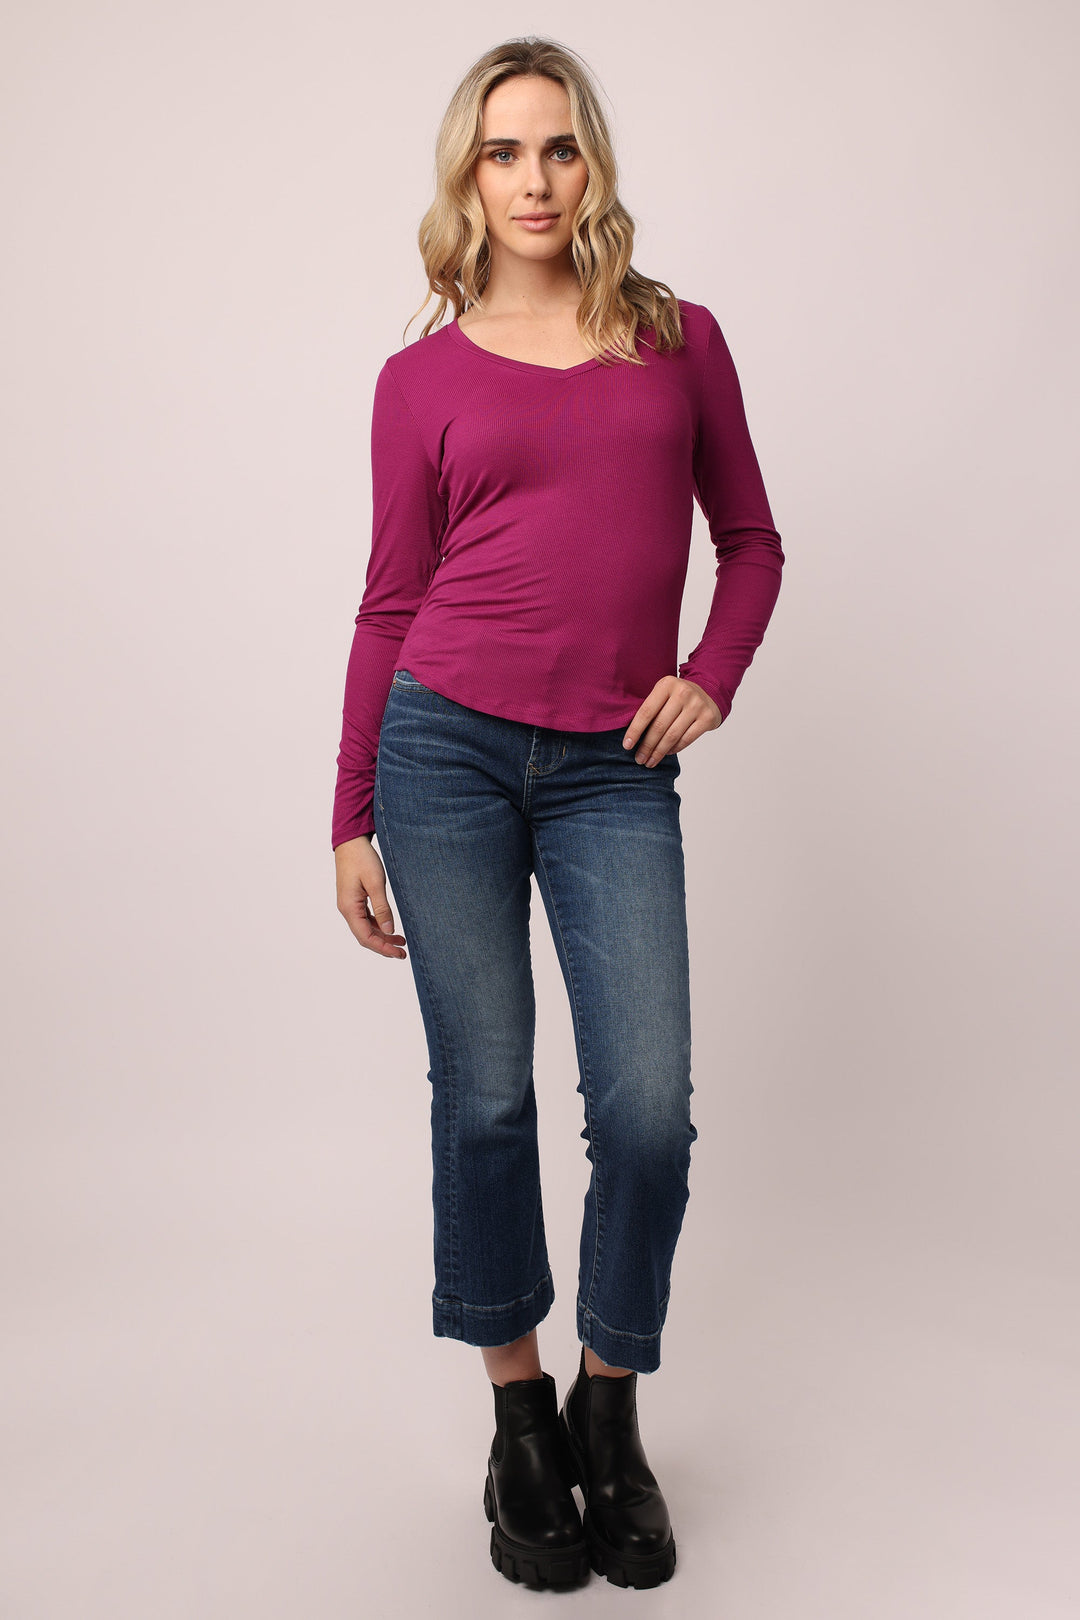 image of a female model wearing a SOPHIE LONG SLEEVE TEE FUCHSIA TOPS